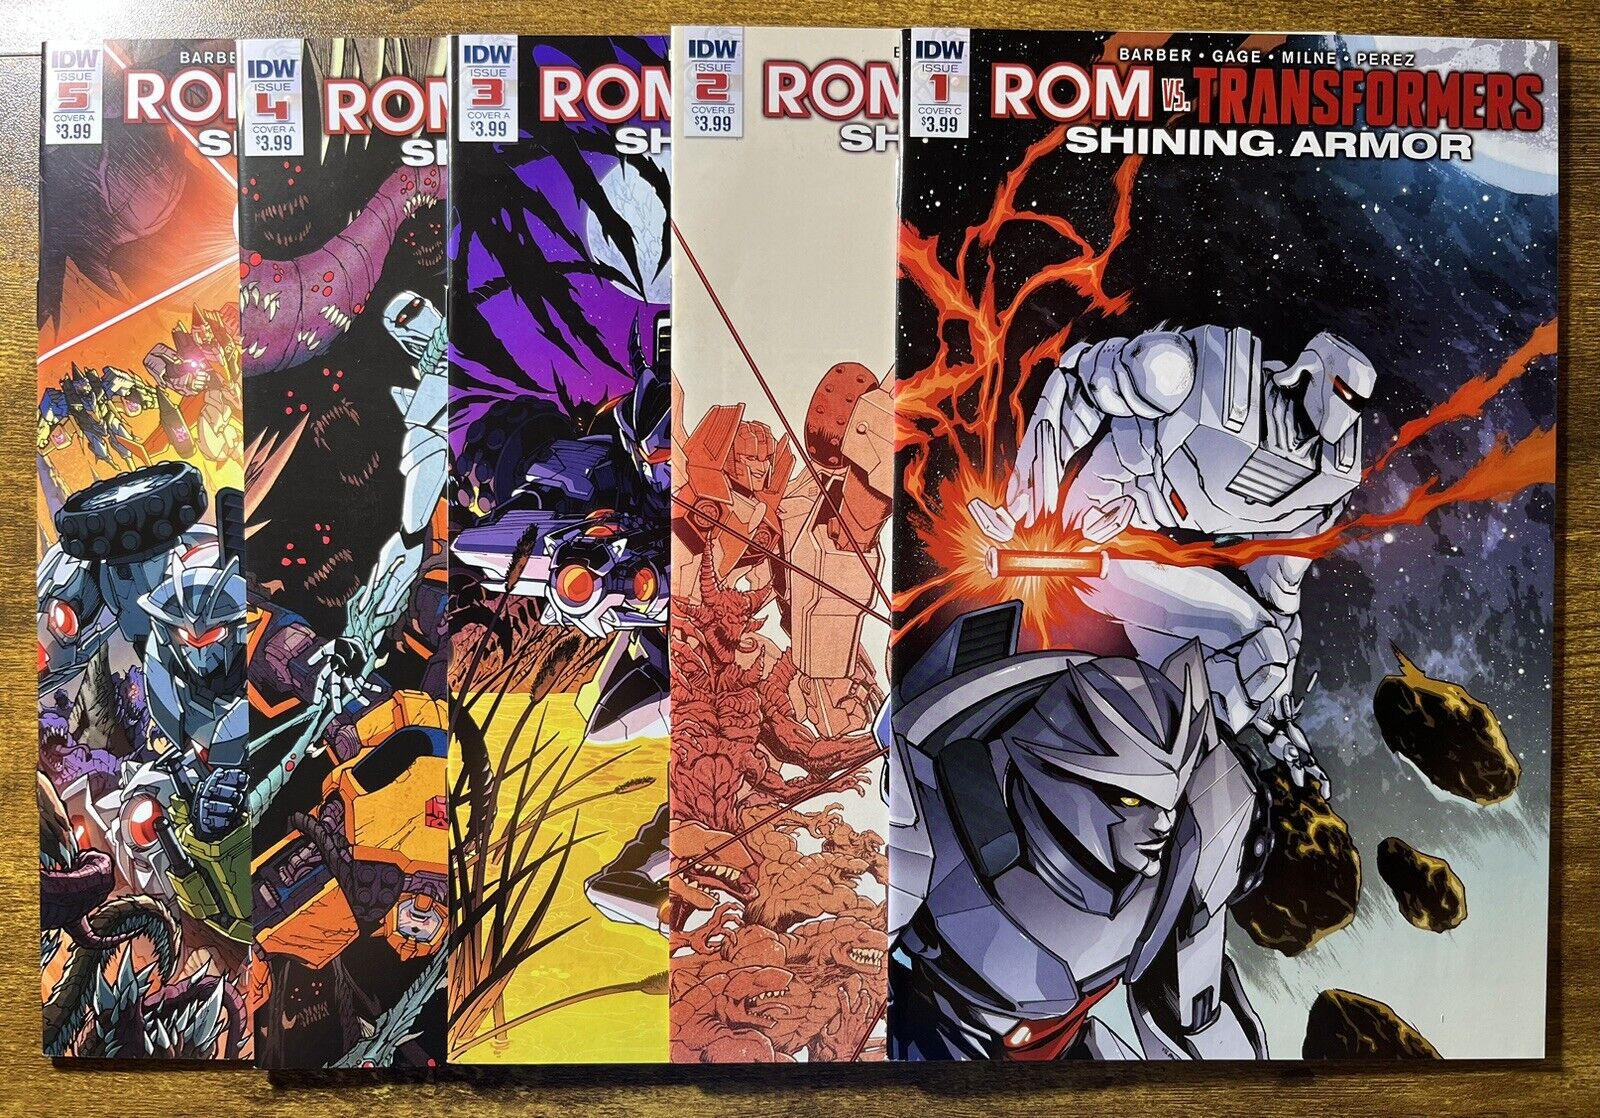 ROM VS. TRANSFORMERS: SHINING ARMOR 1-5 COMPLETE SET 1C, 2B, 3A, 4A, 5A IDW 2017